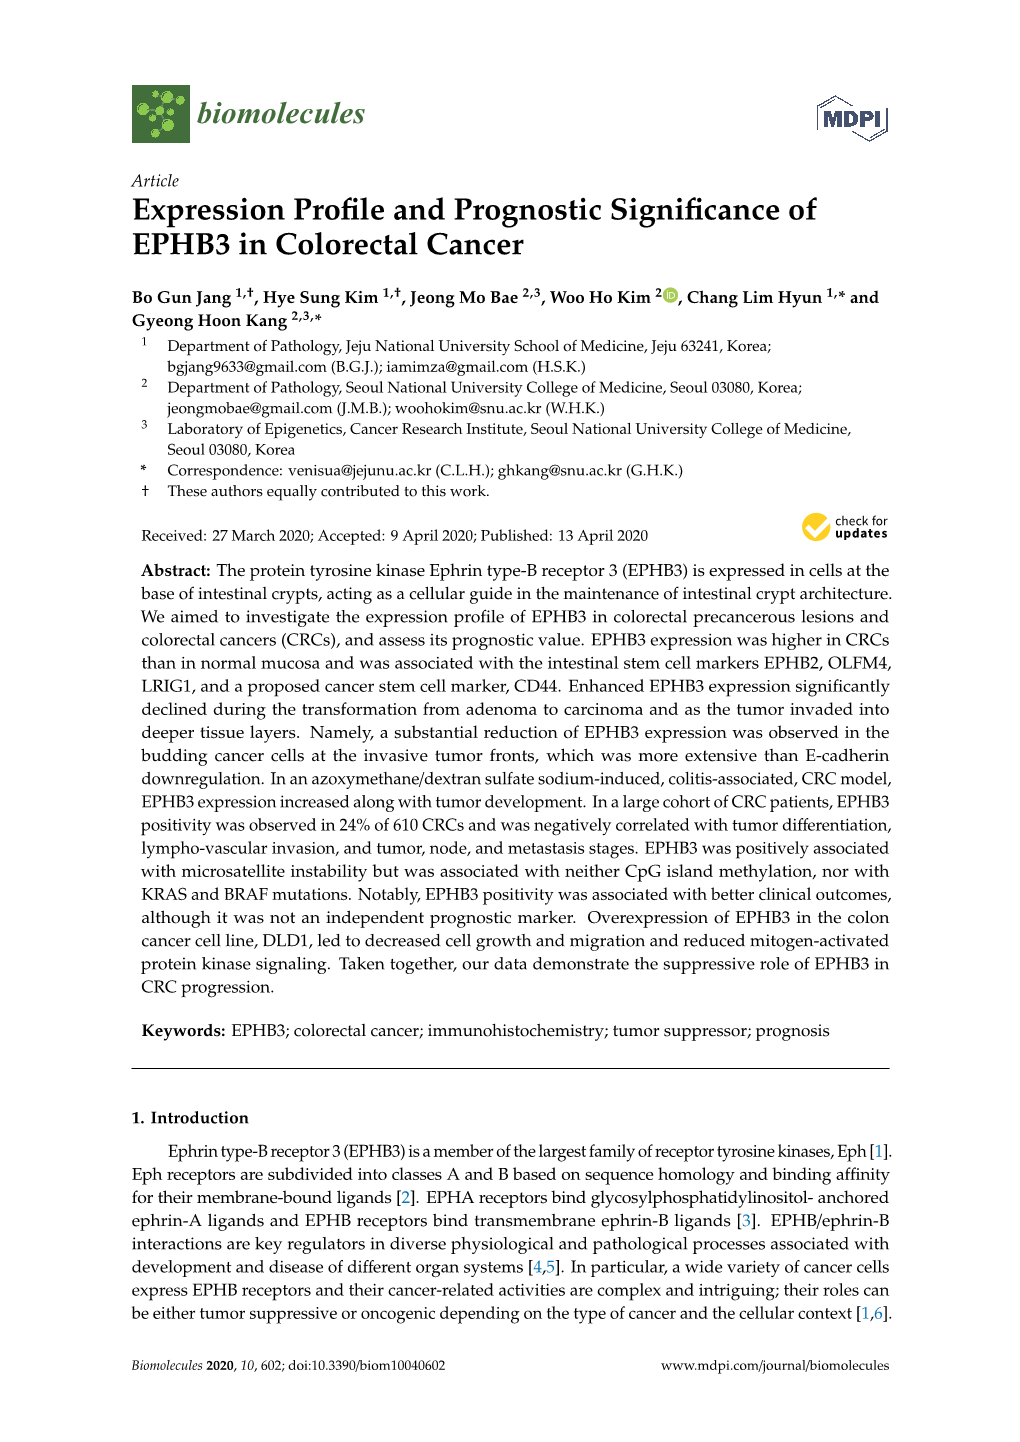 Expression Profile and Prognostic Significance of EPHB3 in Colorectal Cancer